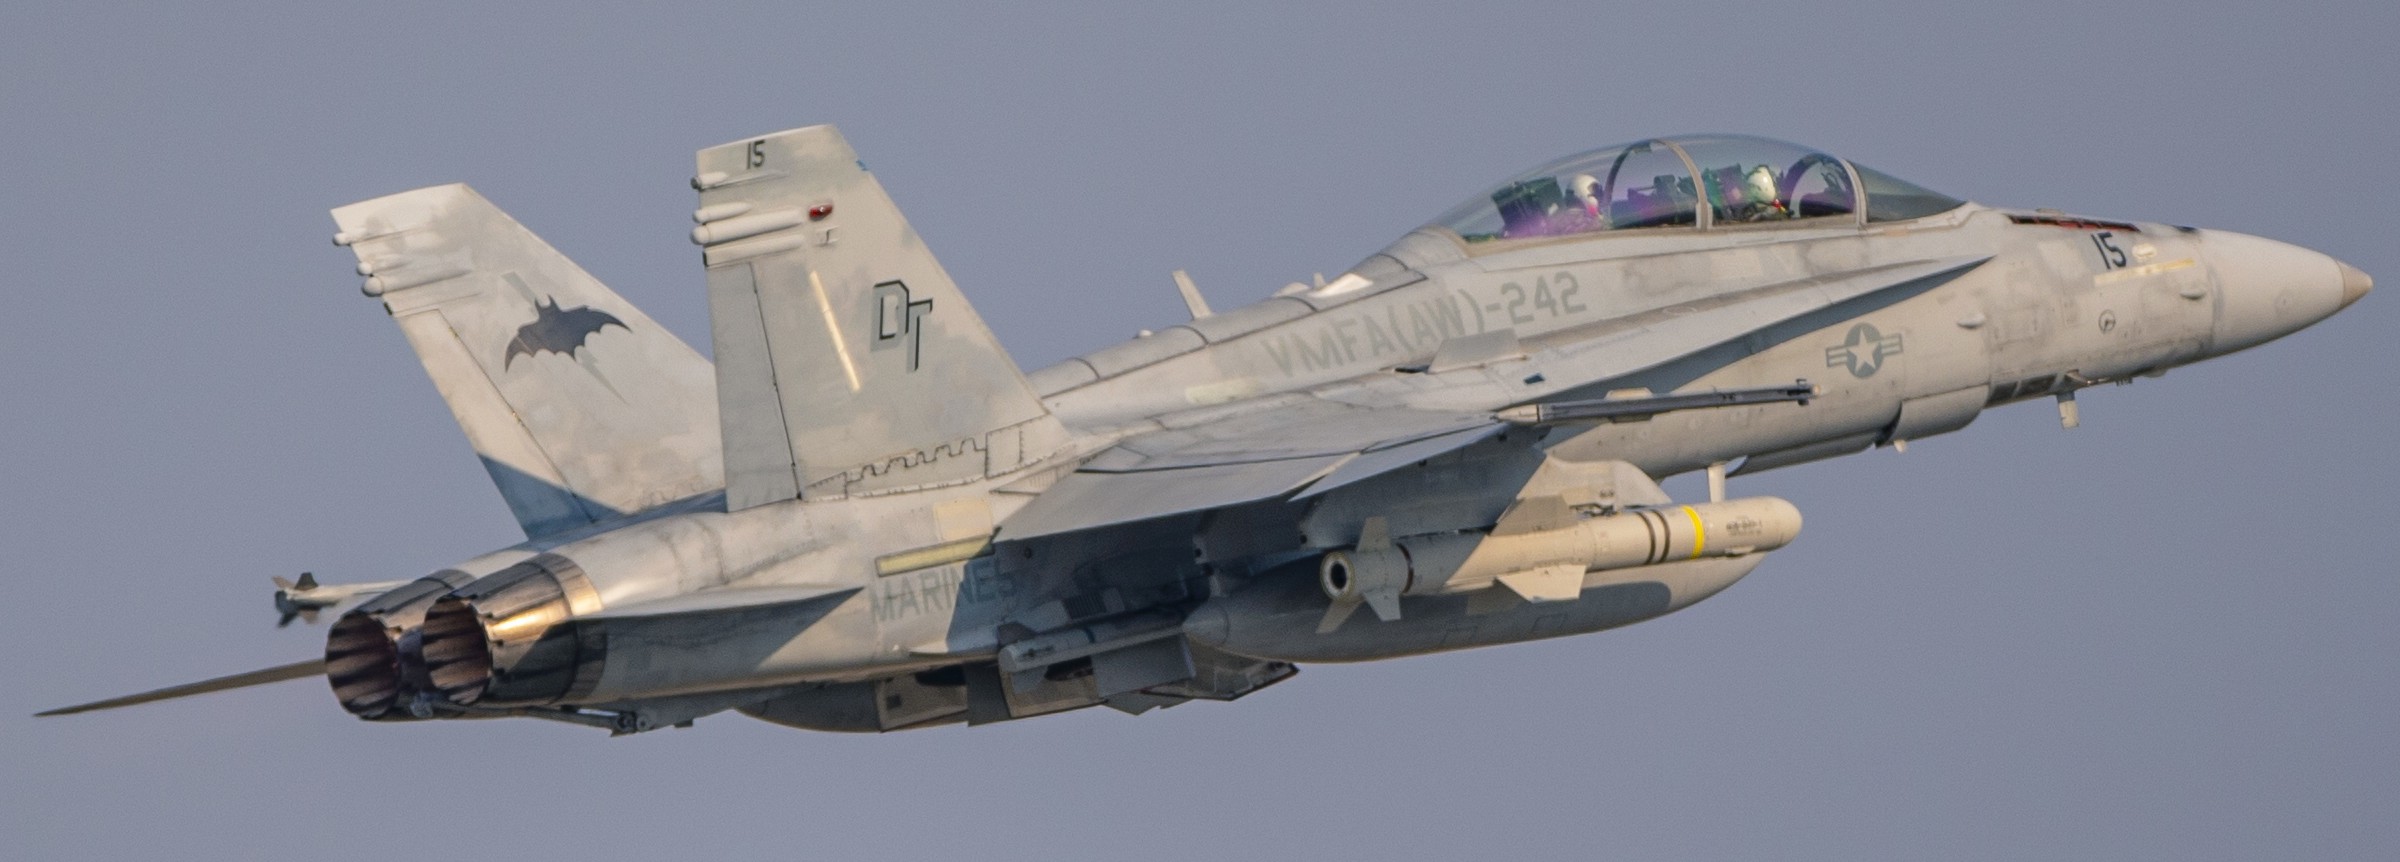 vmfa(aw)-242 bats marine all-weather fighter attack squadron usmc f/a-18d hornet 112